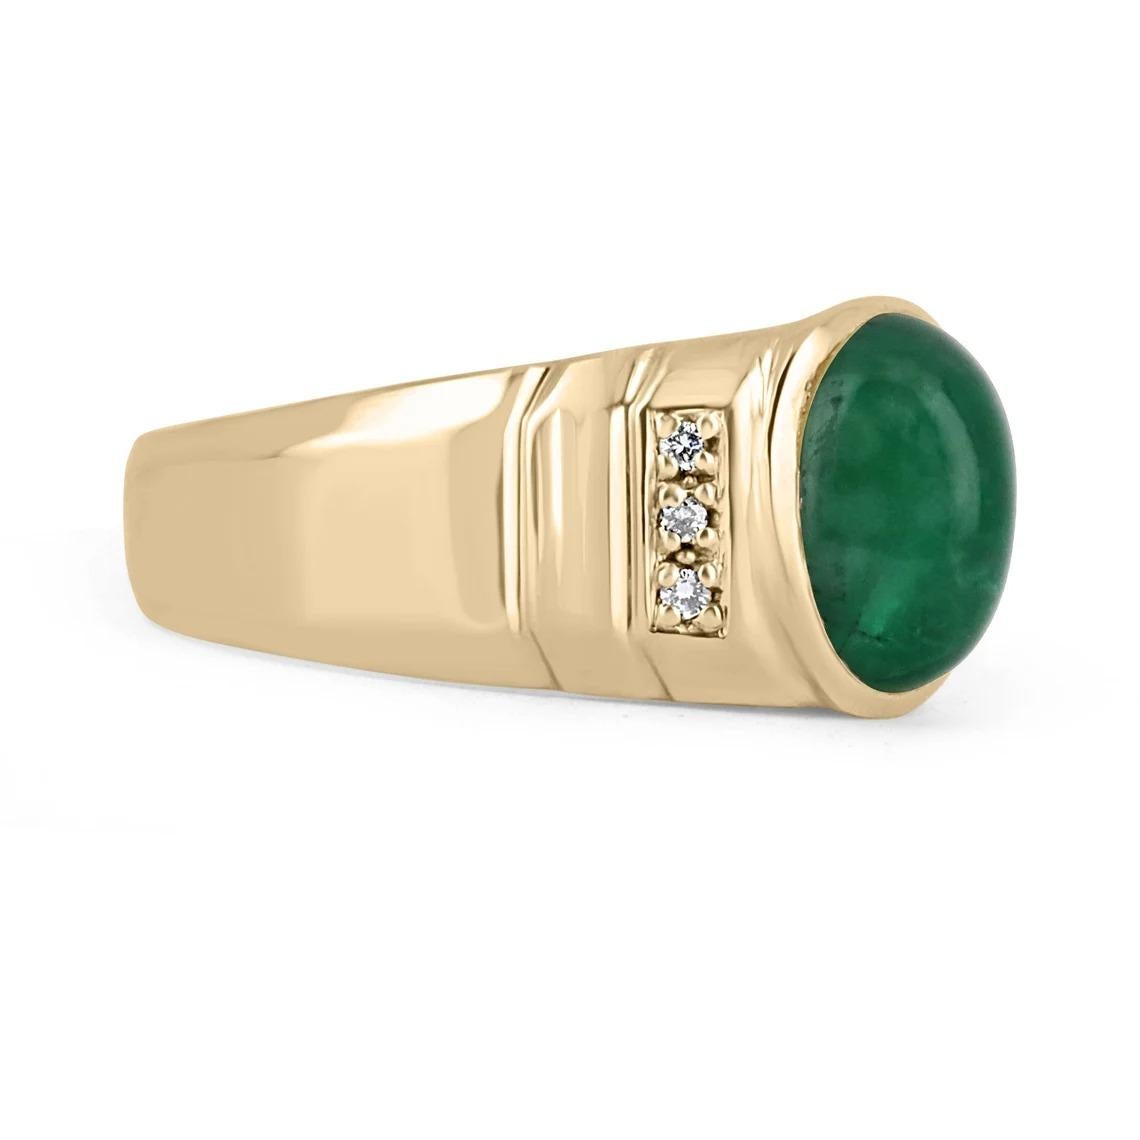 A handsome emerald and diamond ring. The center stone features a stunning 4.87-carat, oval-cut cabochon emerald with great qualities. Bezel set, with pave set brilliant round cut diamonds accenting the center gem, with intricate design layout on the